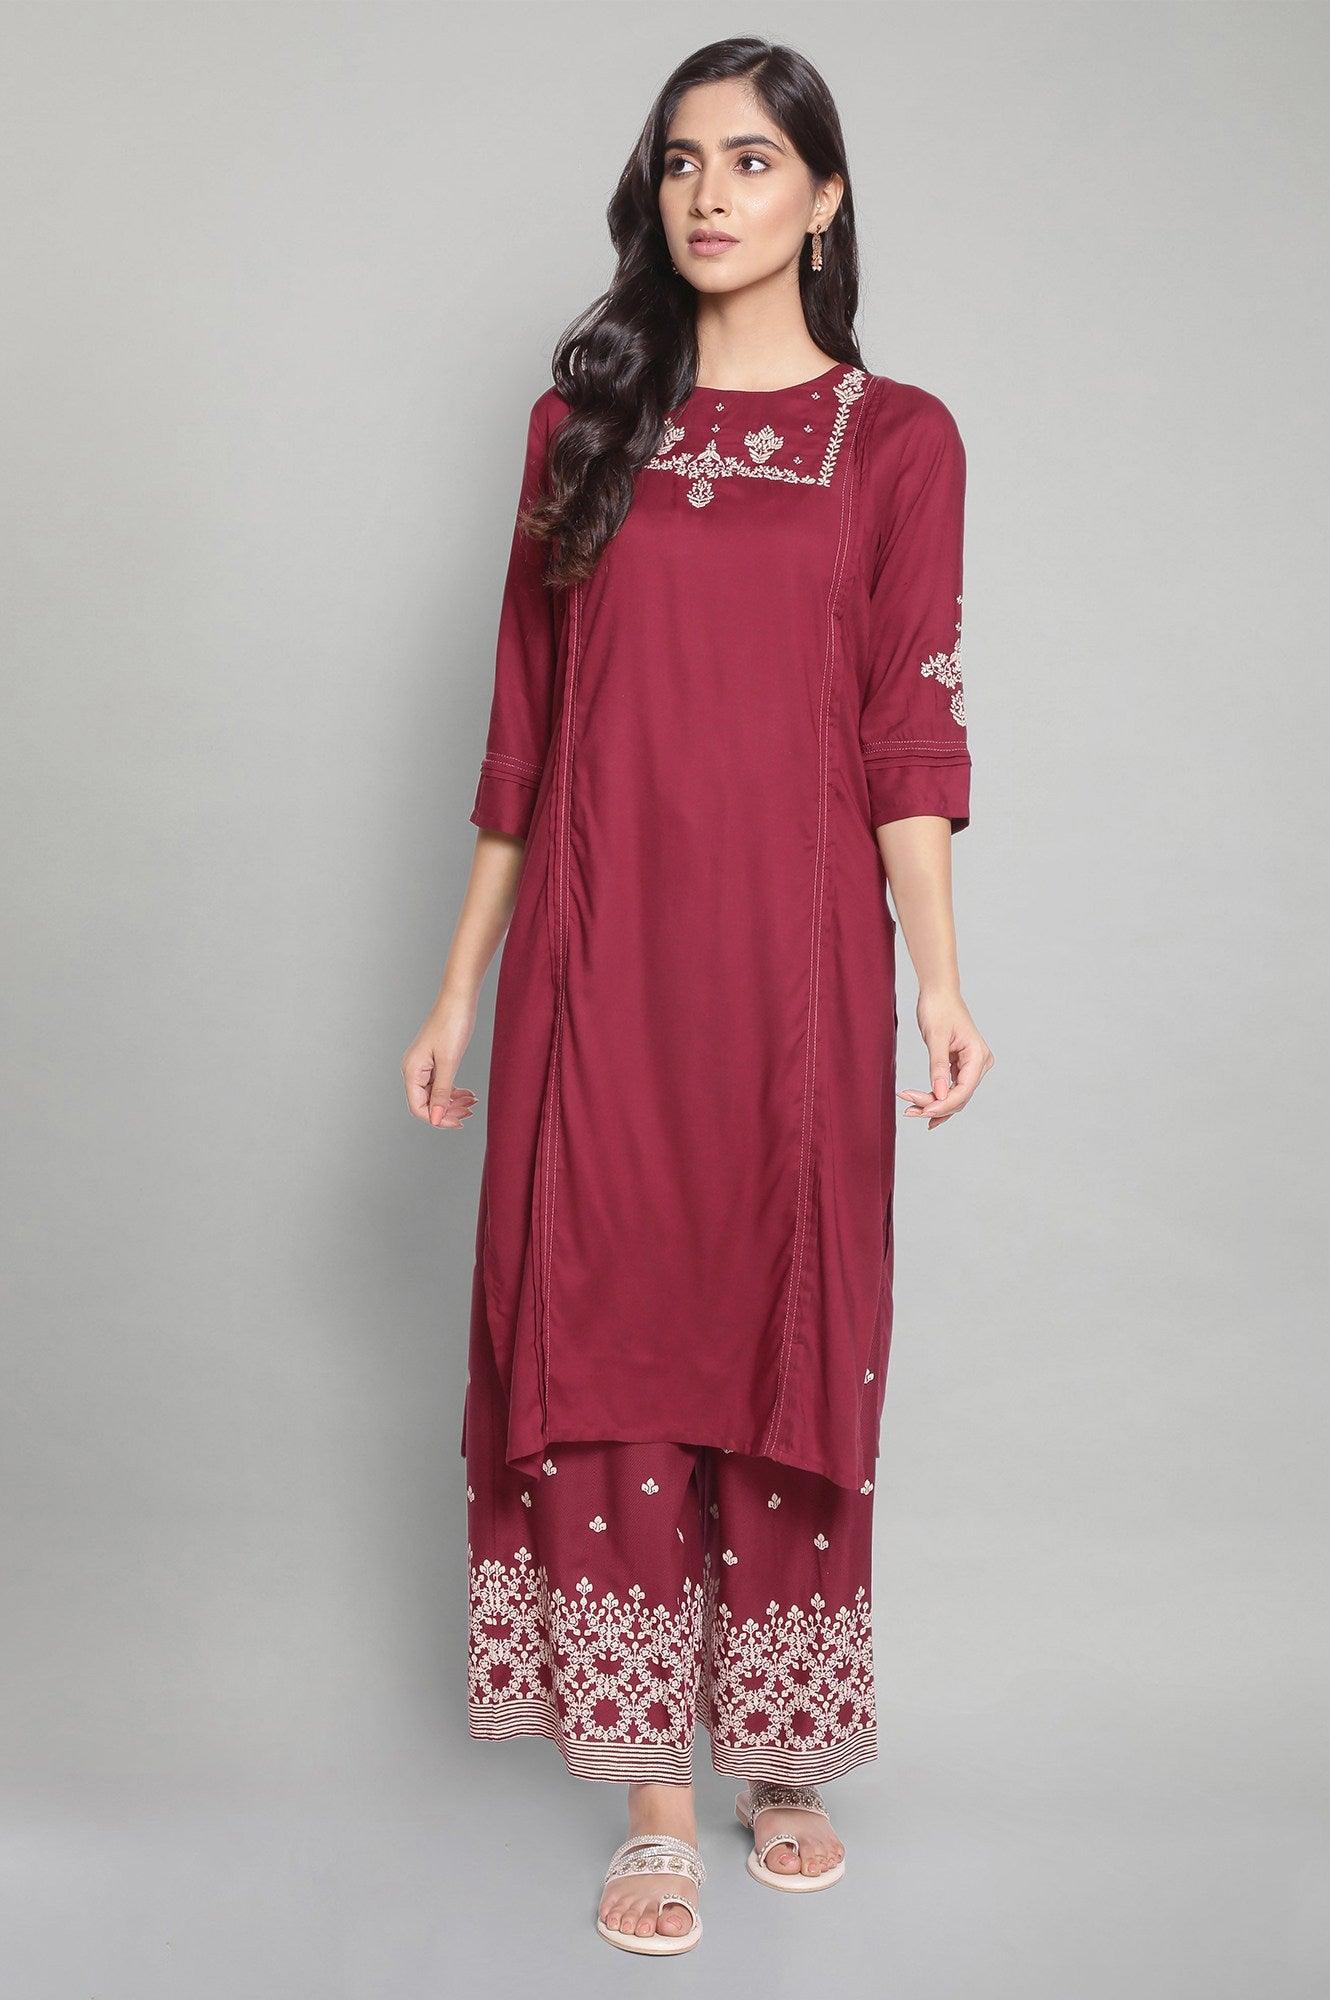 Maroon Solid Plus Size Kurta With Embroidery - wforwoman